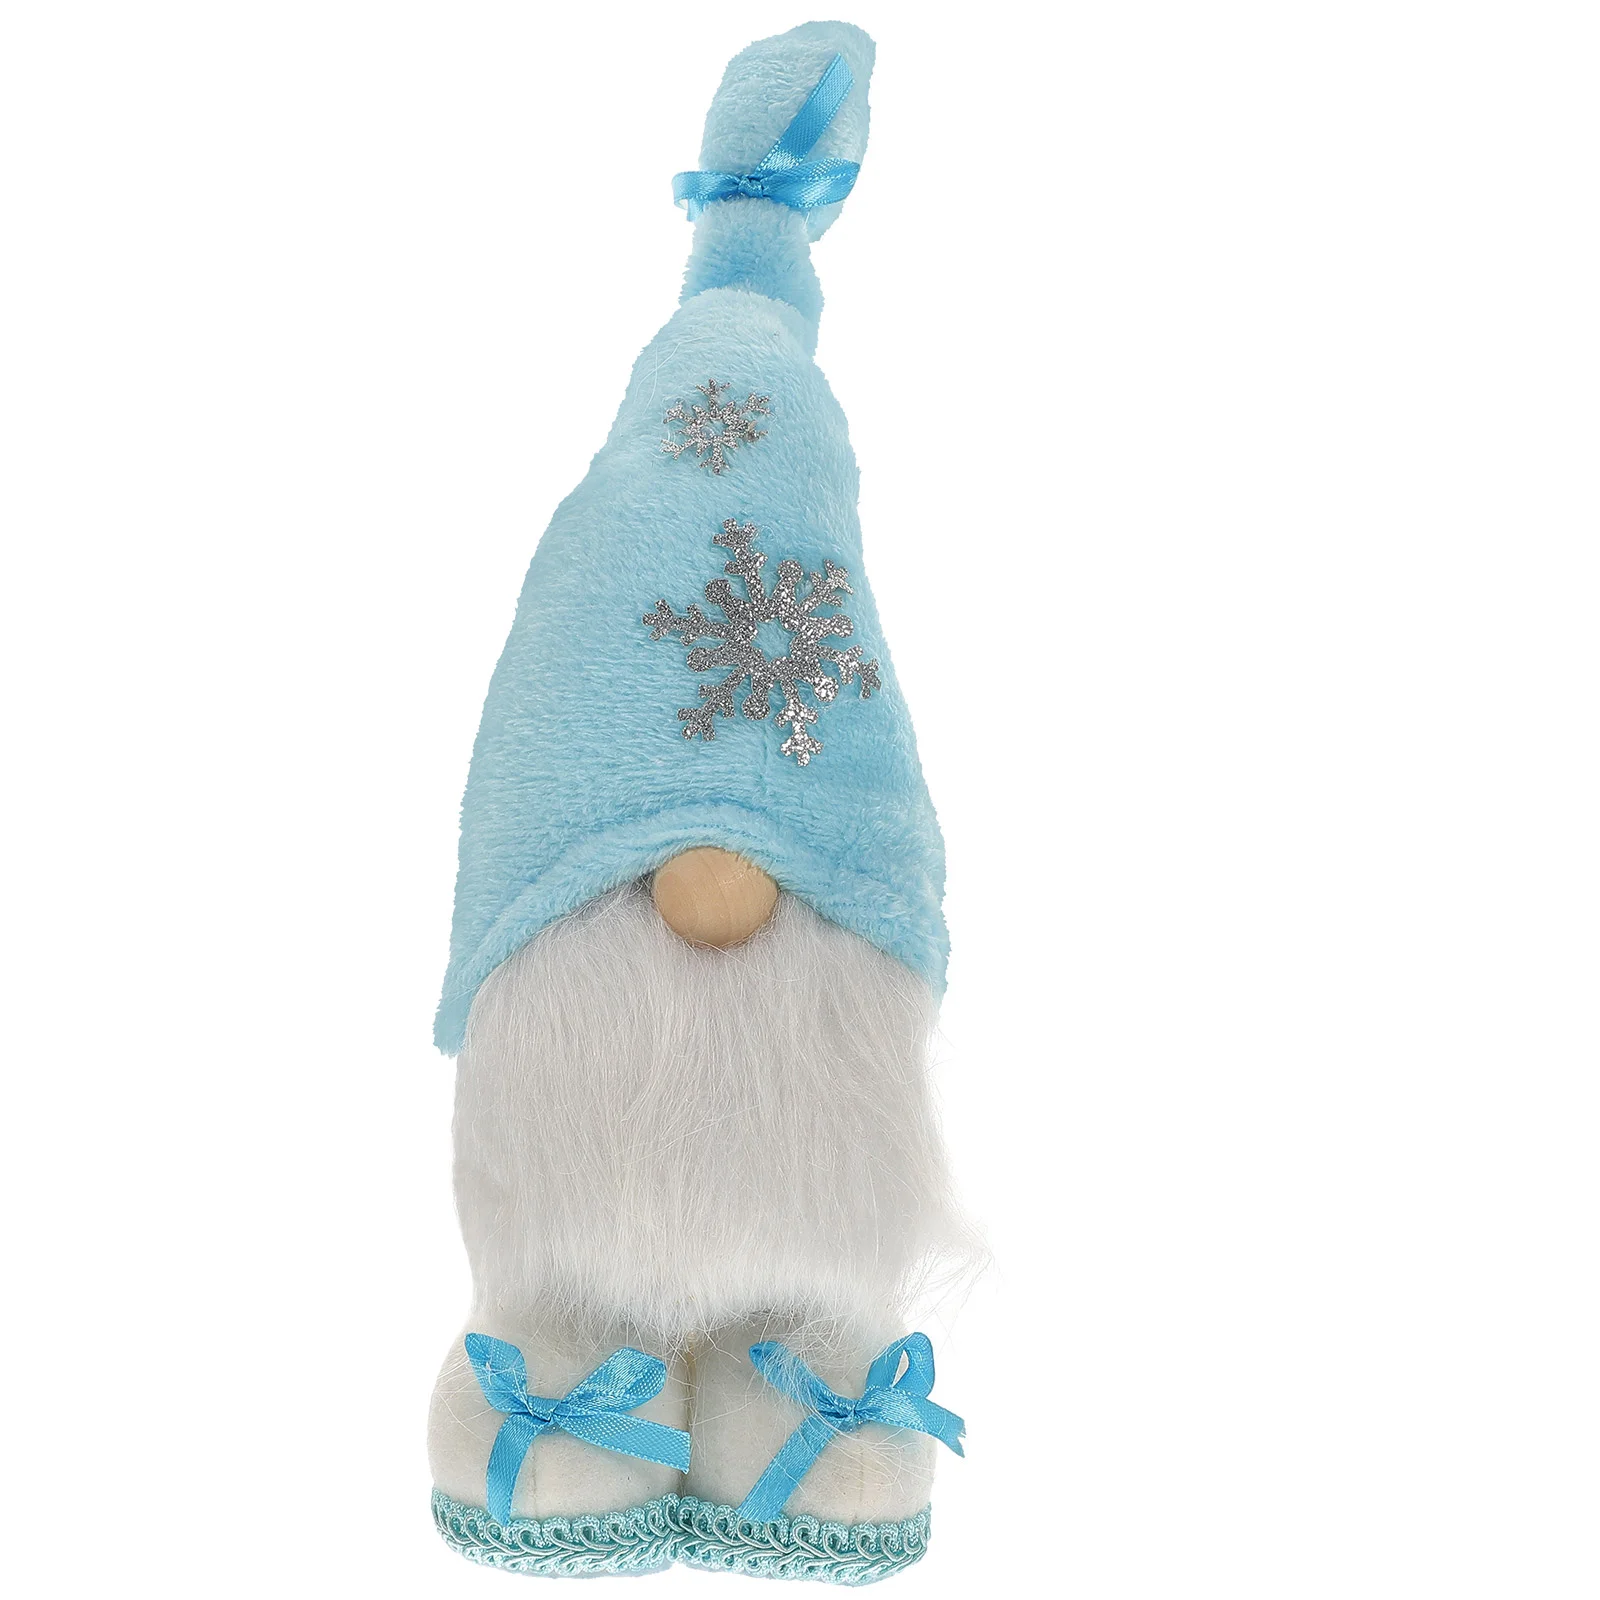 

Honey Bee Ocean Toys Summer Festival Ornament Manual Ocean Gnome Wood Lovely Gnome Party Adornment